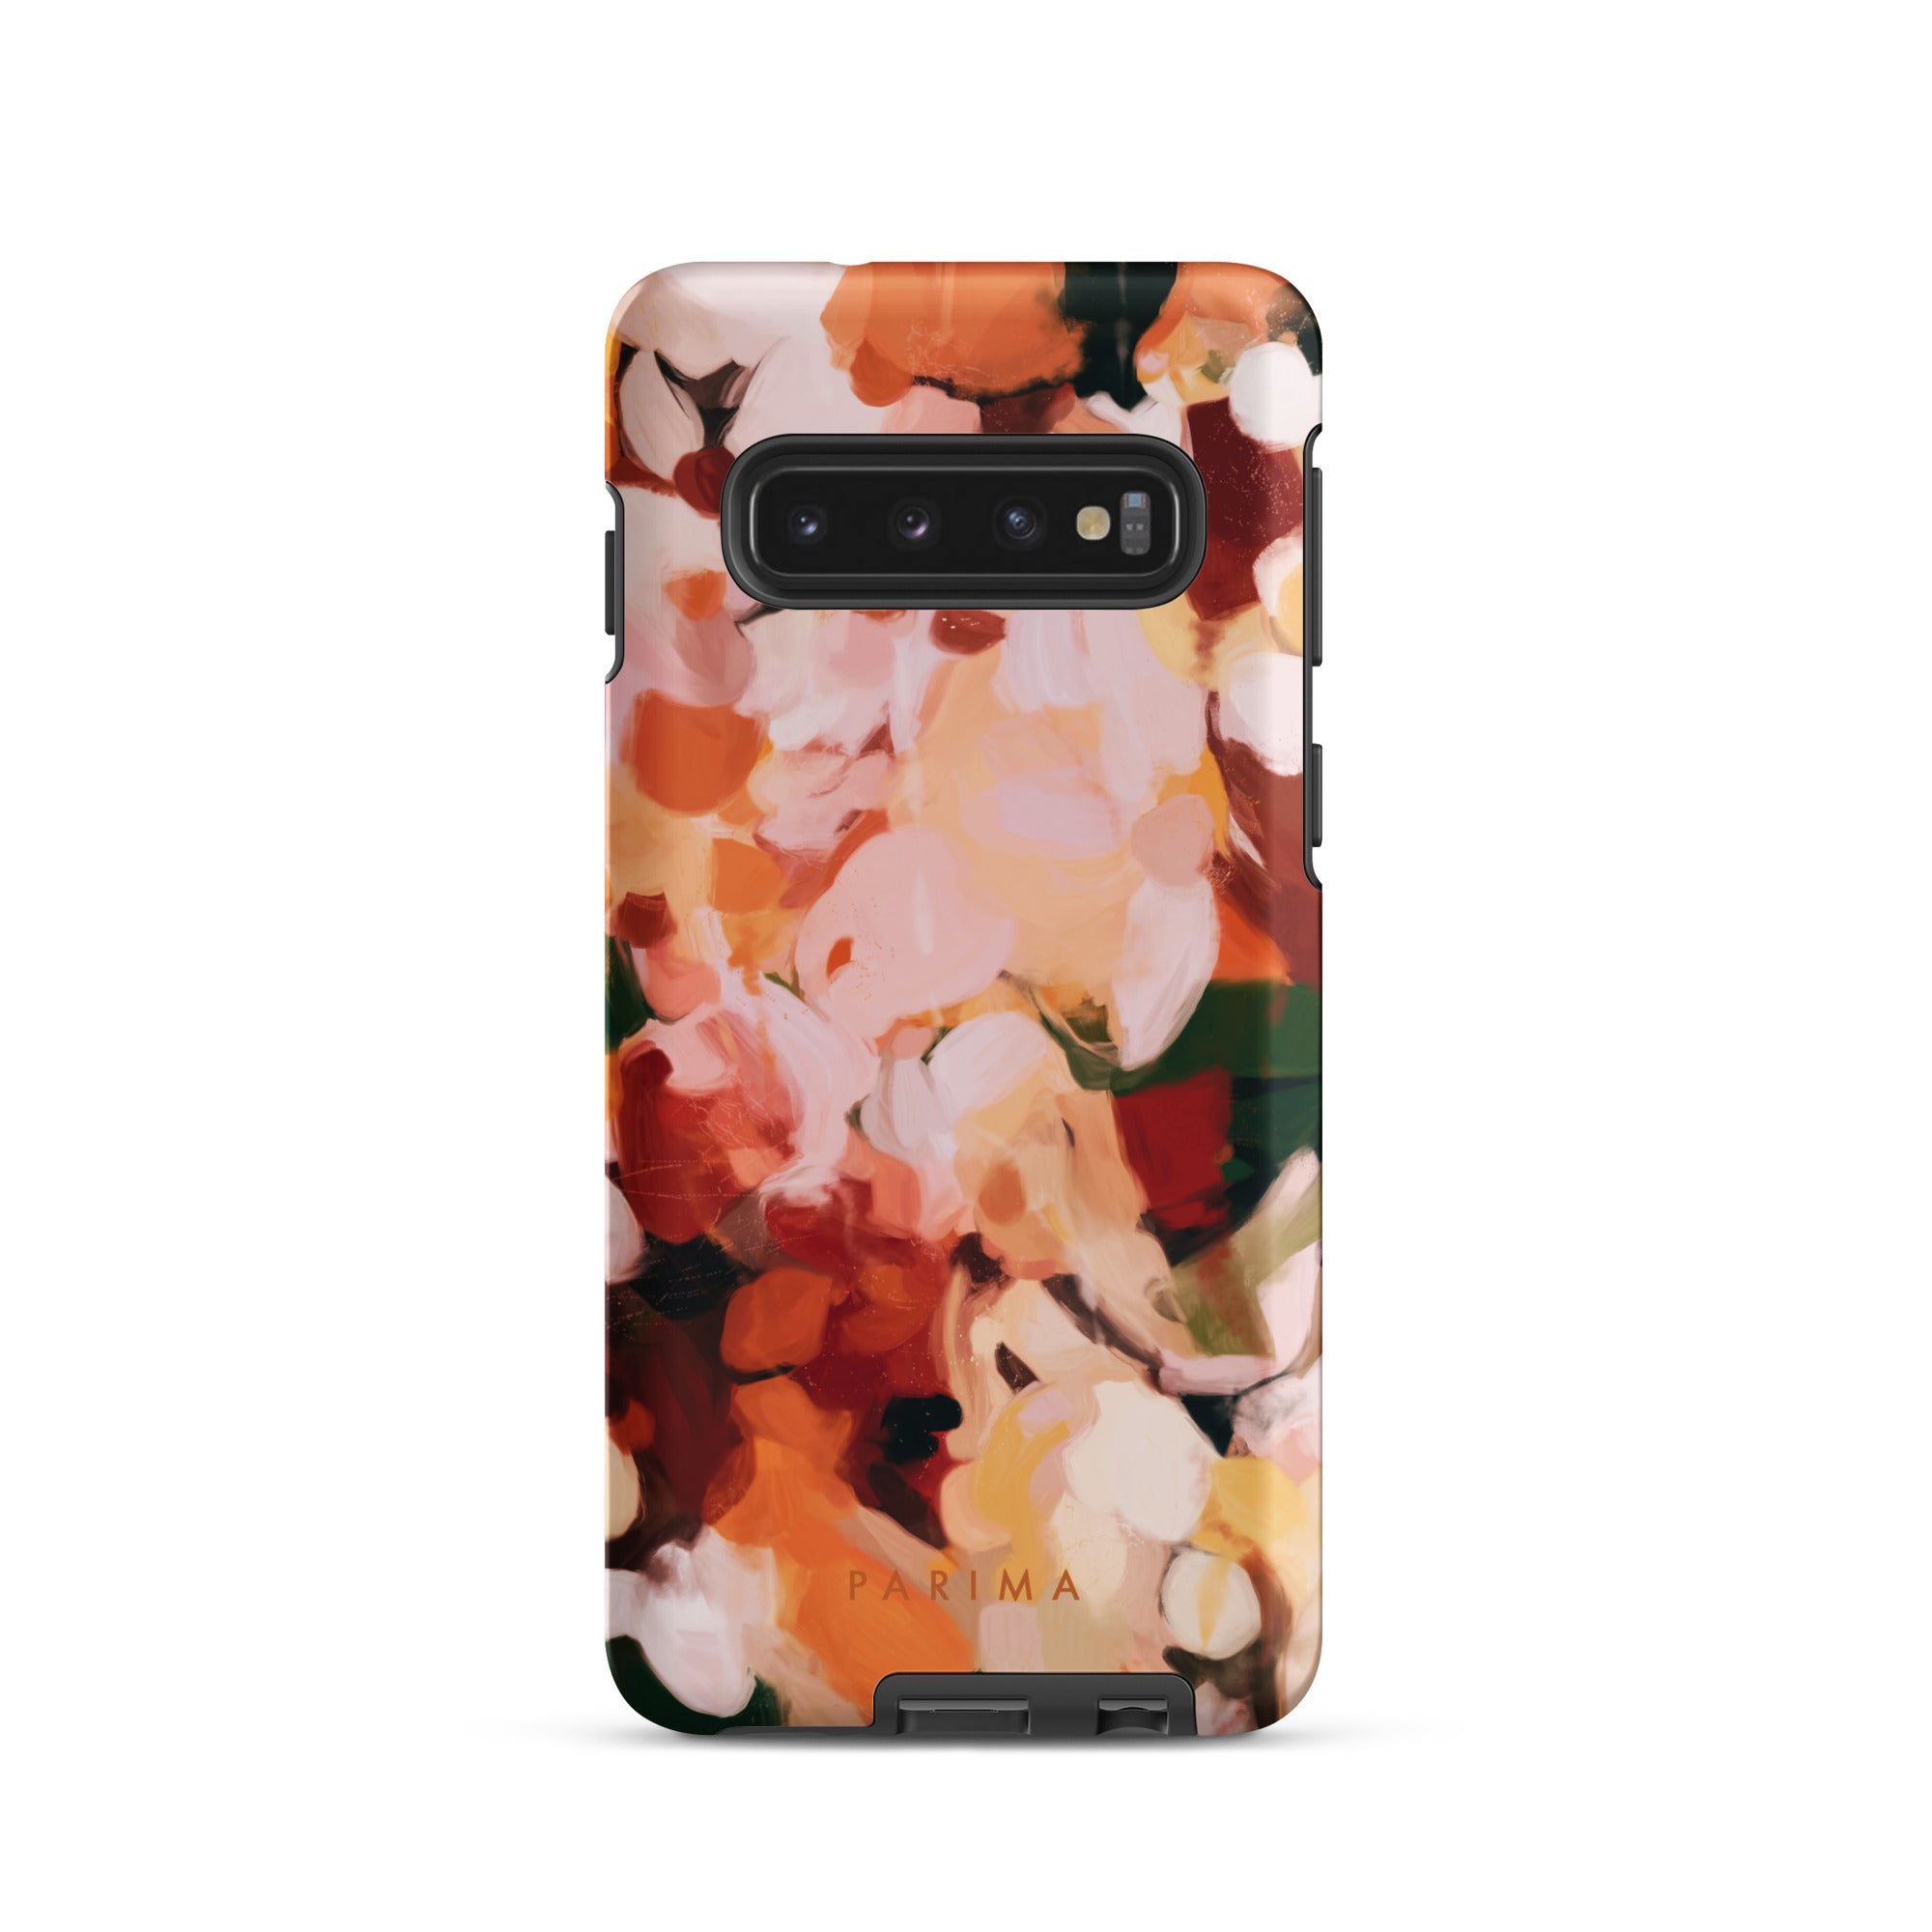 The Grove, pink and green abstract art on Samsung Galaxy S10 tough case by Parima Studio